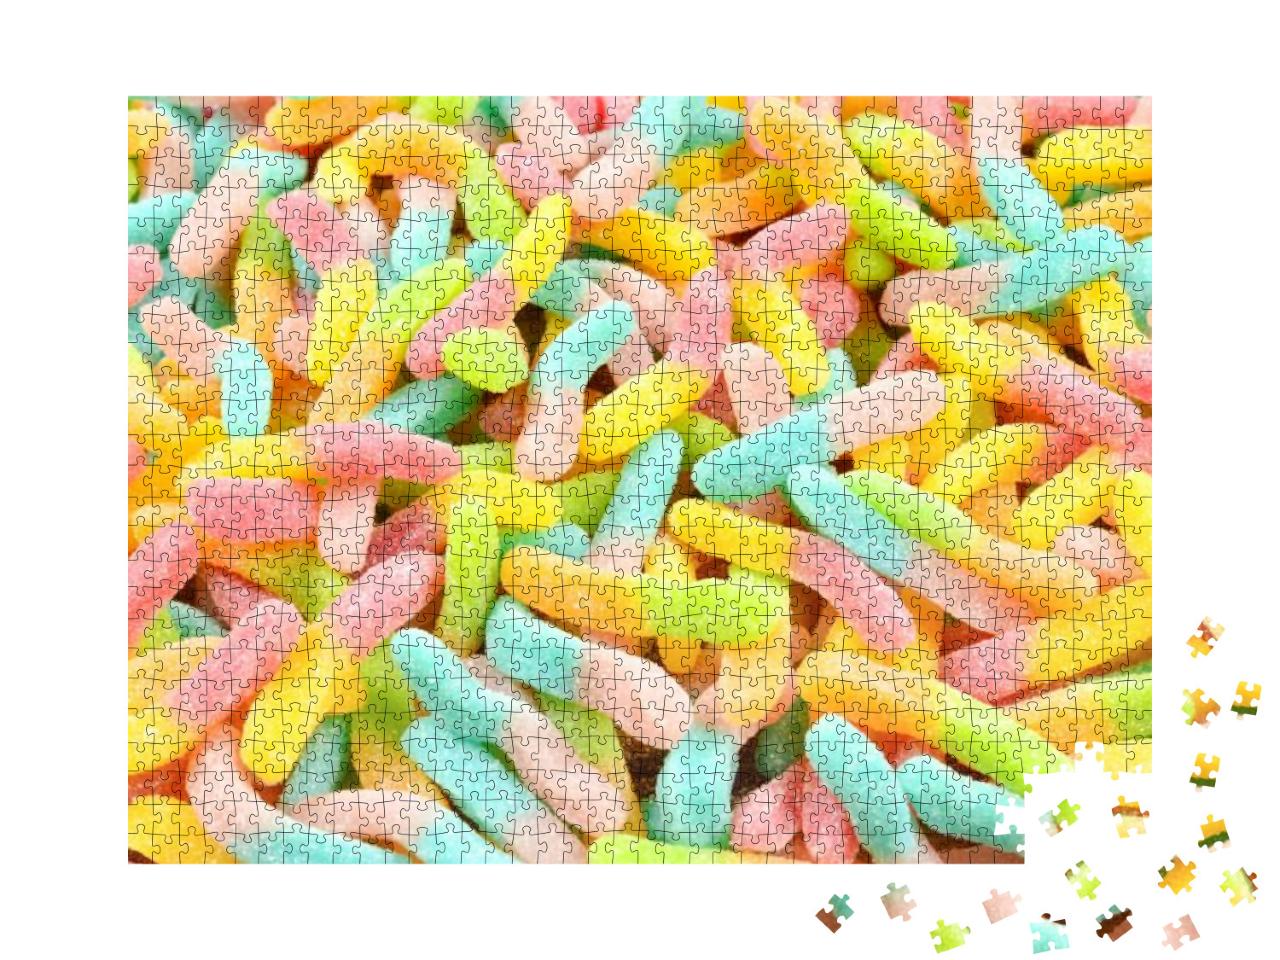 Juicy Colorful Jelly Sweets. Gummy Candies. Snakes... Jigsaw Puzzle with 1000 pieces